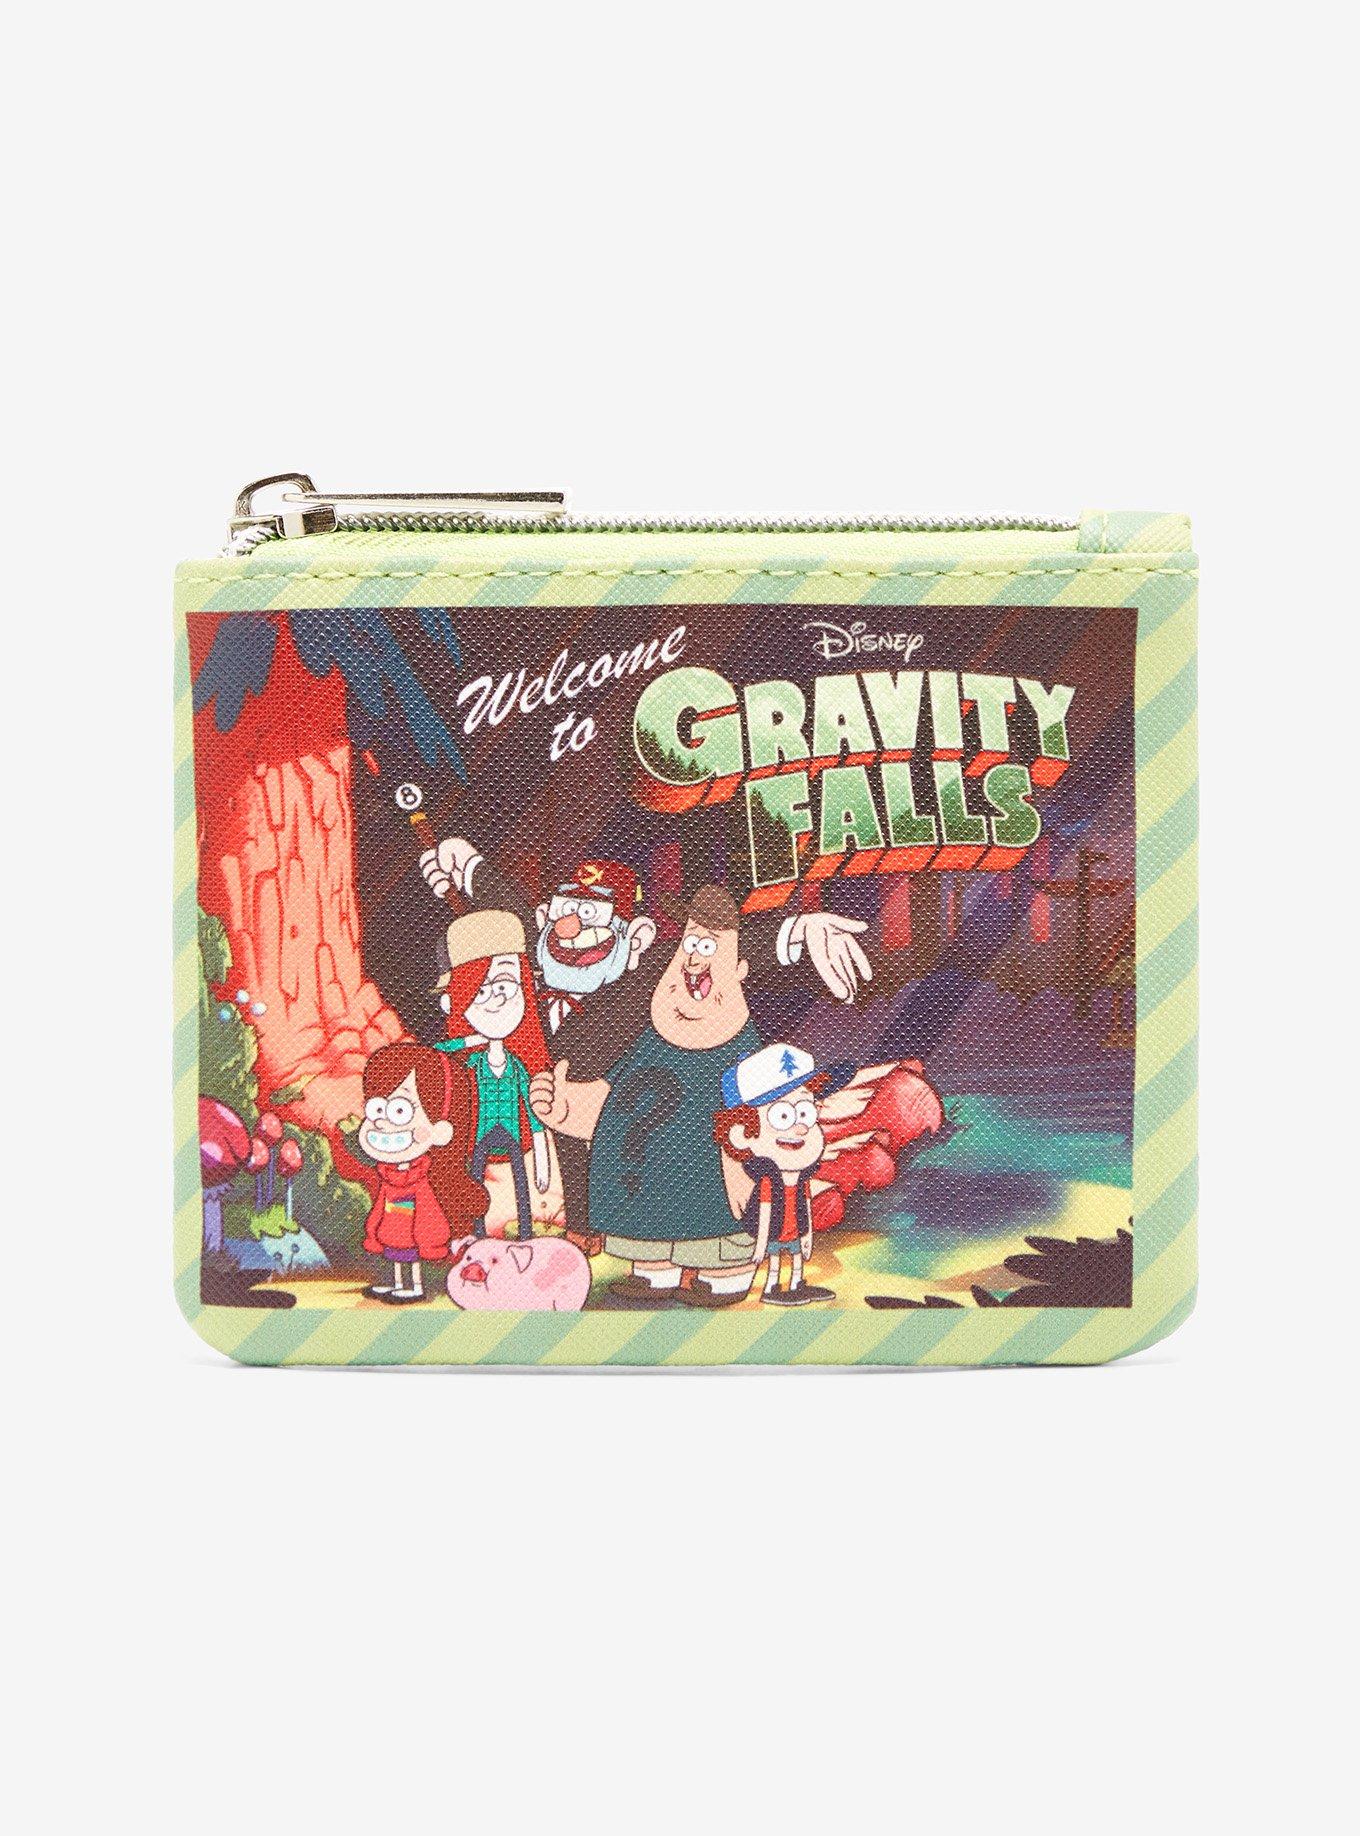 Disney's Gravity Falls 6 Piece Christmas Set Featuring Mabel Pines ~NEW~